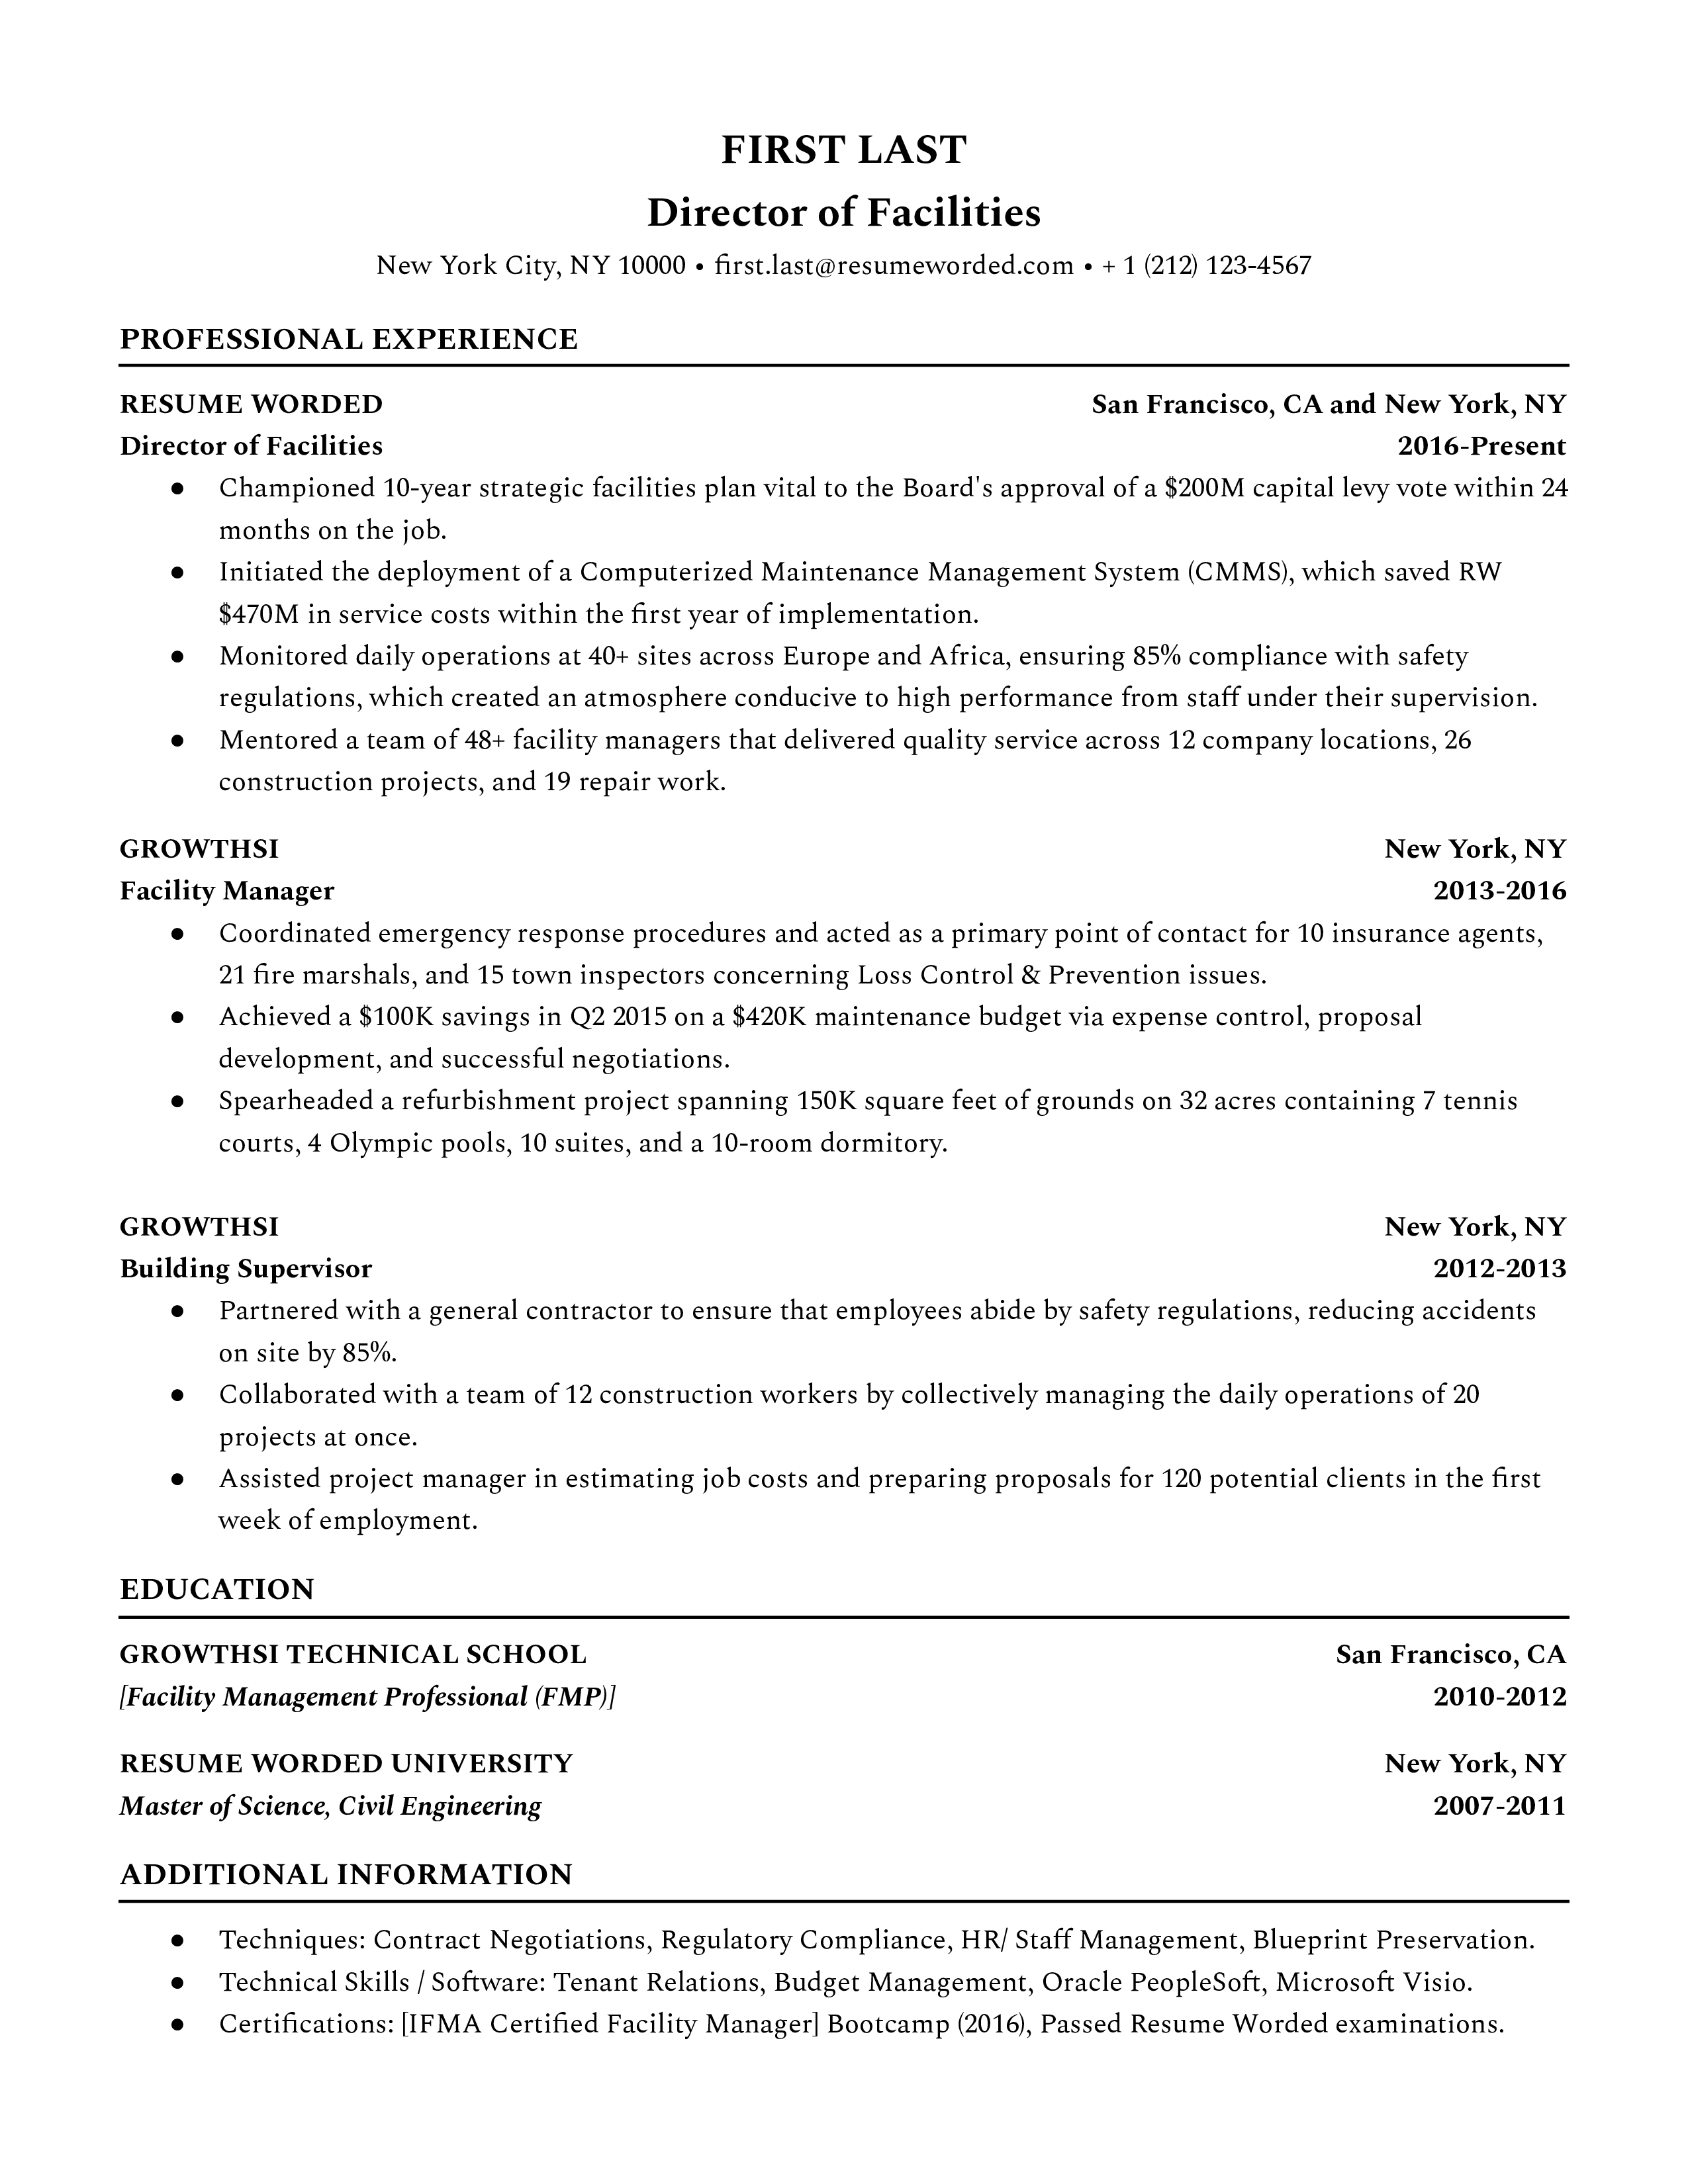 Snapshot of a resume for a Director of Facilities role.